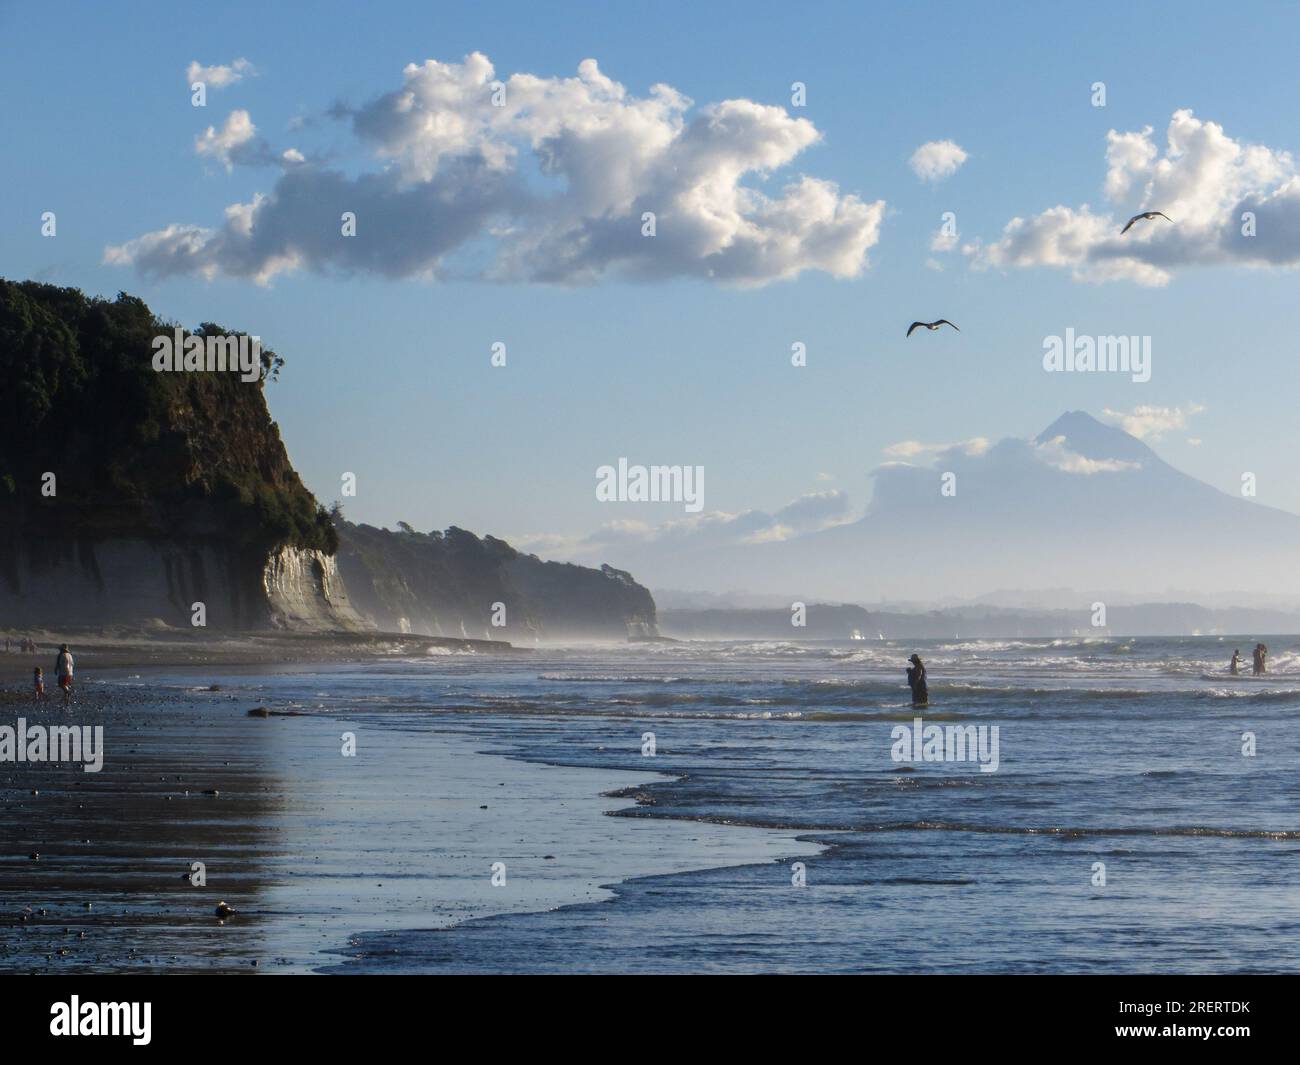 Cliffs at Waiiti Beach on the Tasman Sea in New Zealand with seagulls, people going for a swim and the silhouette of Mt Taranaki in the background Stock Photo